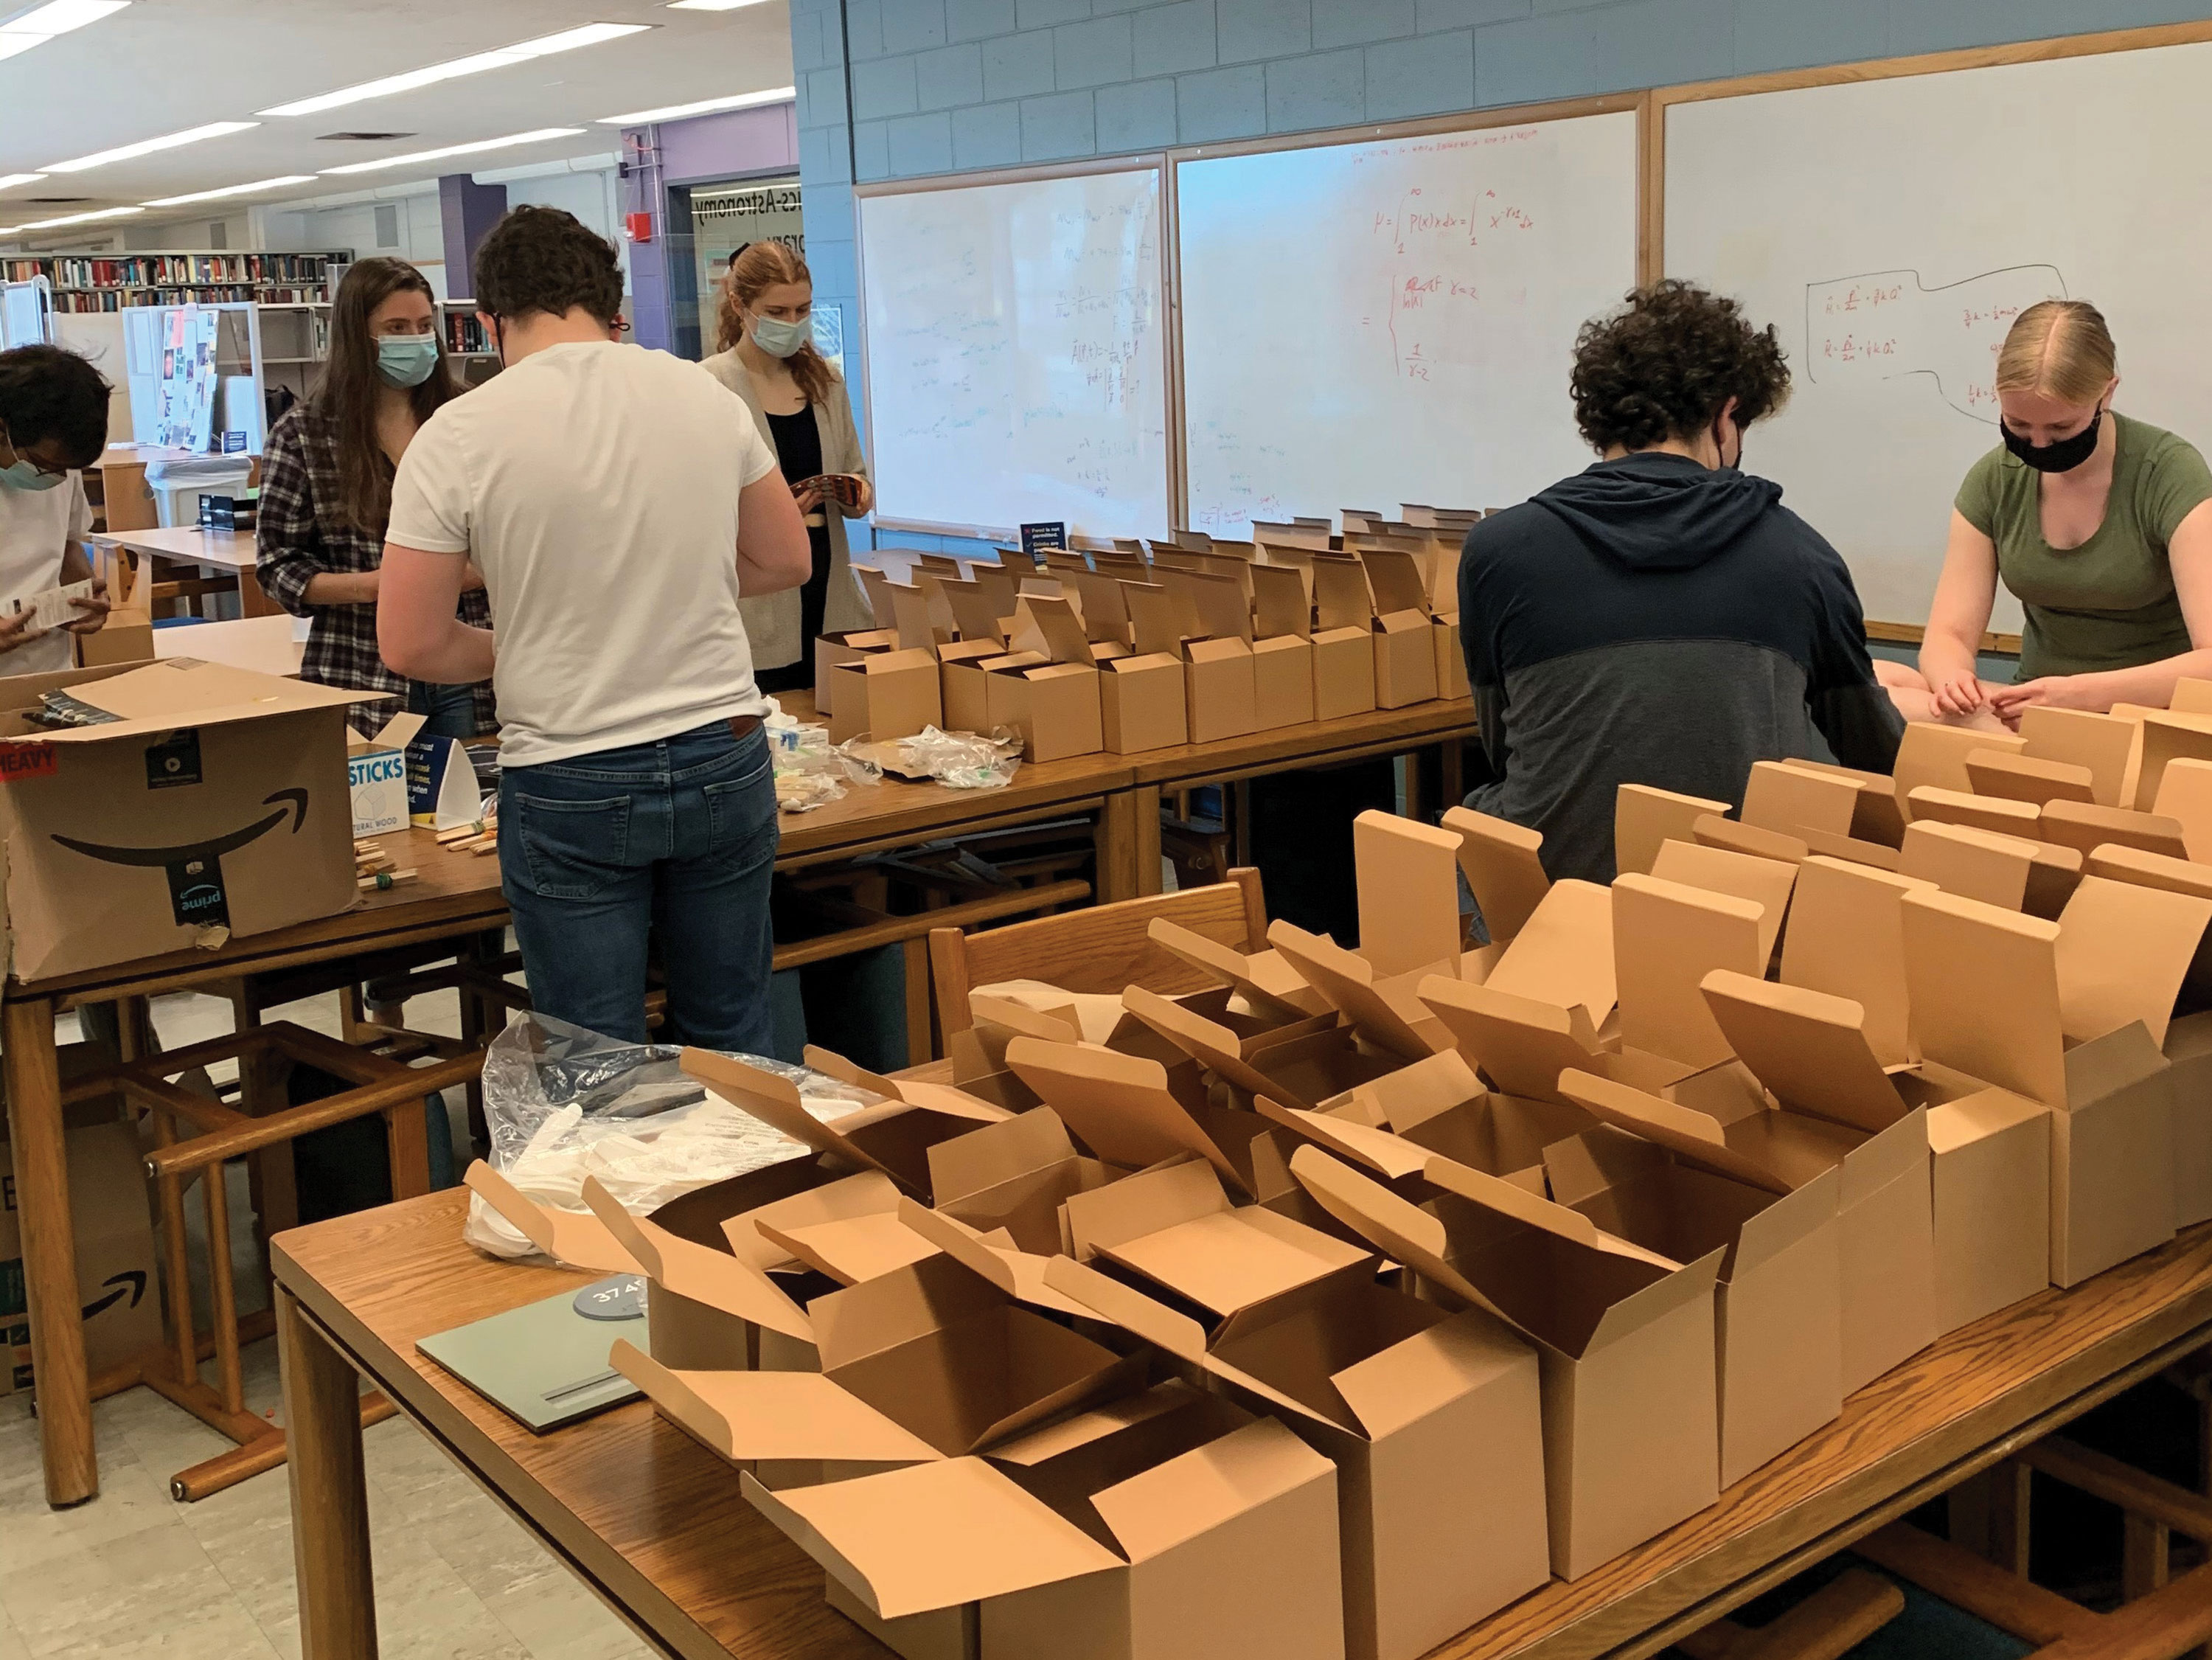 University of Rochester SPS members pack the DIY demonstration boxes. Images courtesy of the chapter